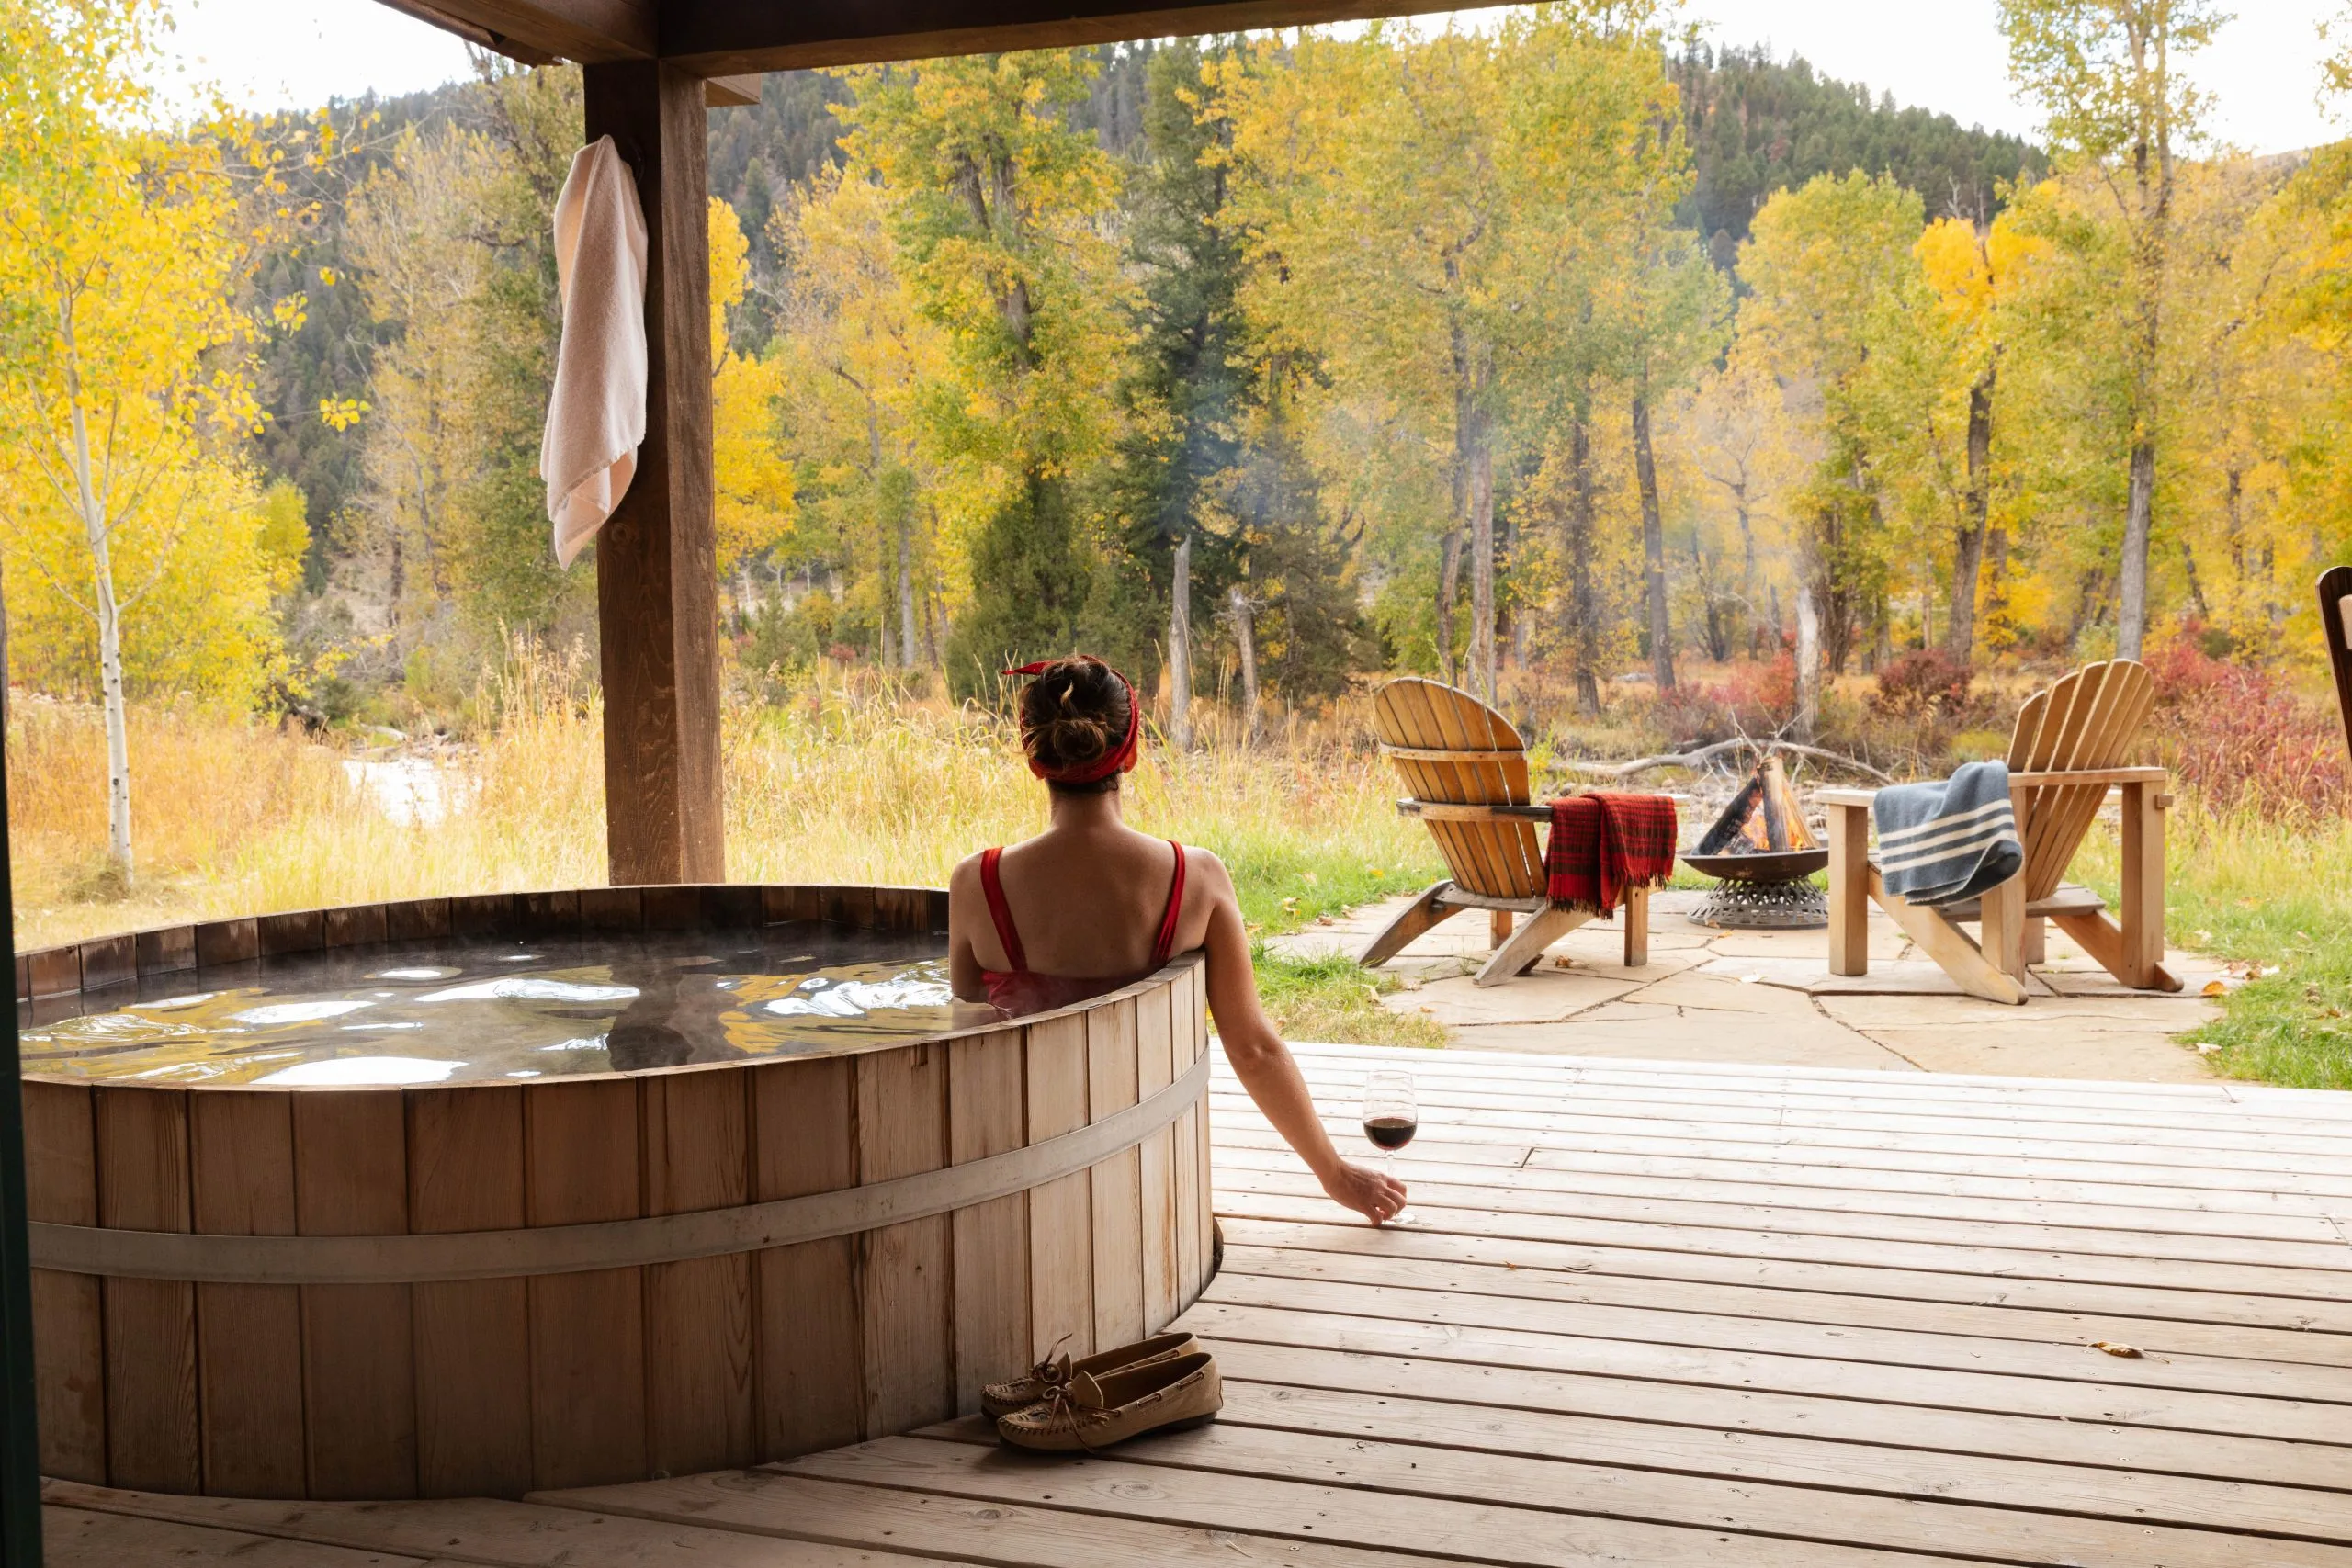 A woman relaxing while holding a glass of red wine sitting inside a wooden hot tub on a porch next to a fire pit and lounge chairs